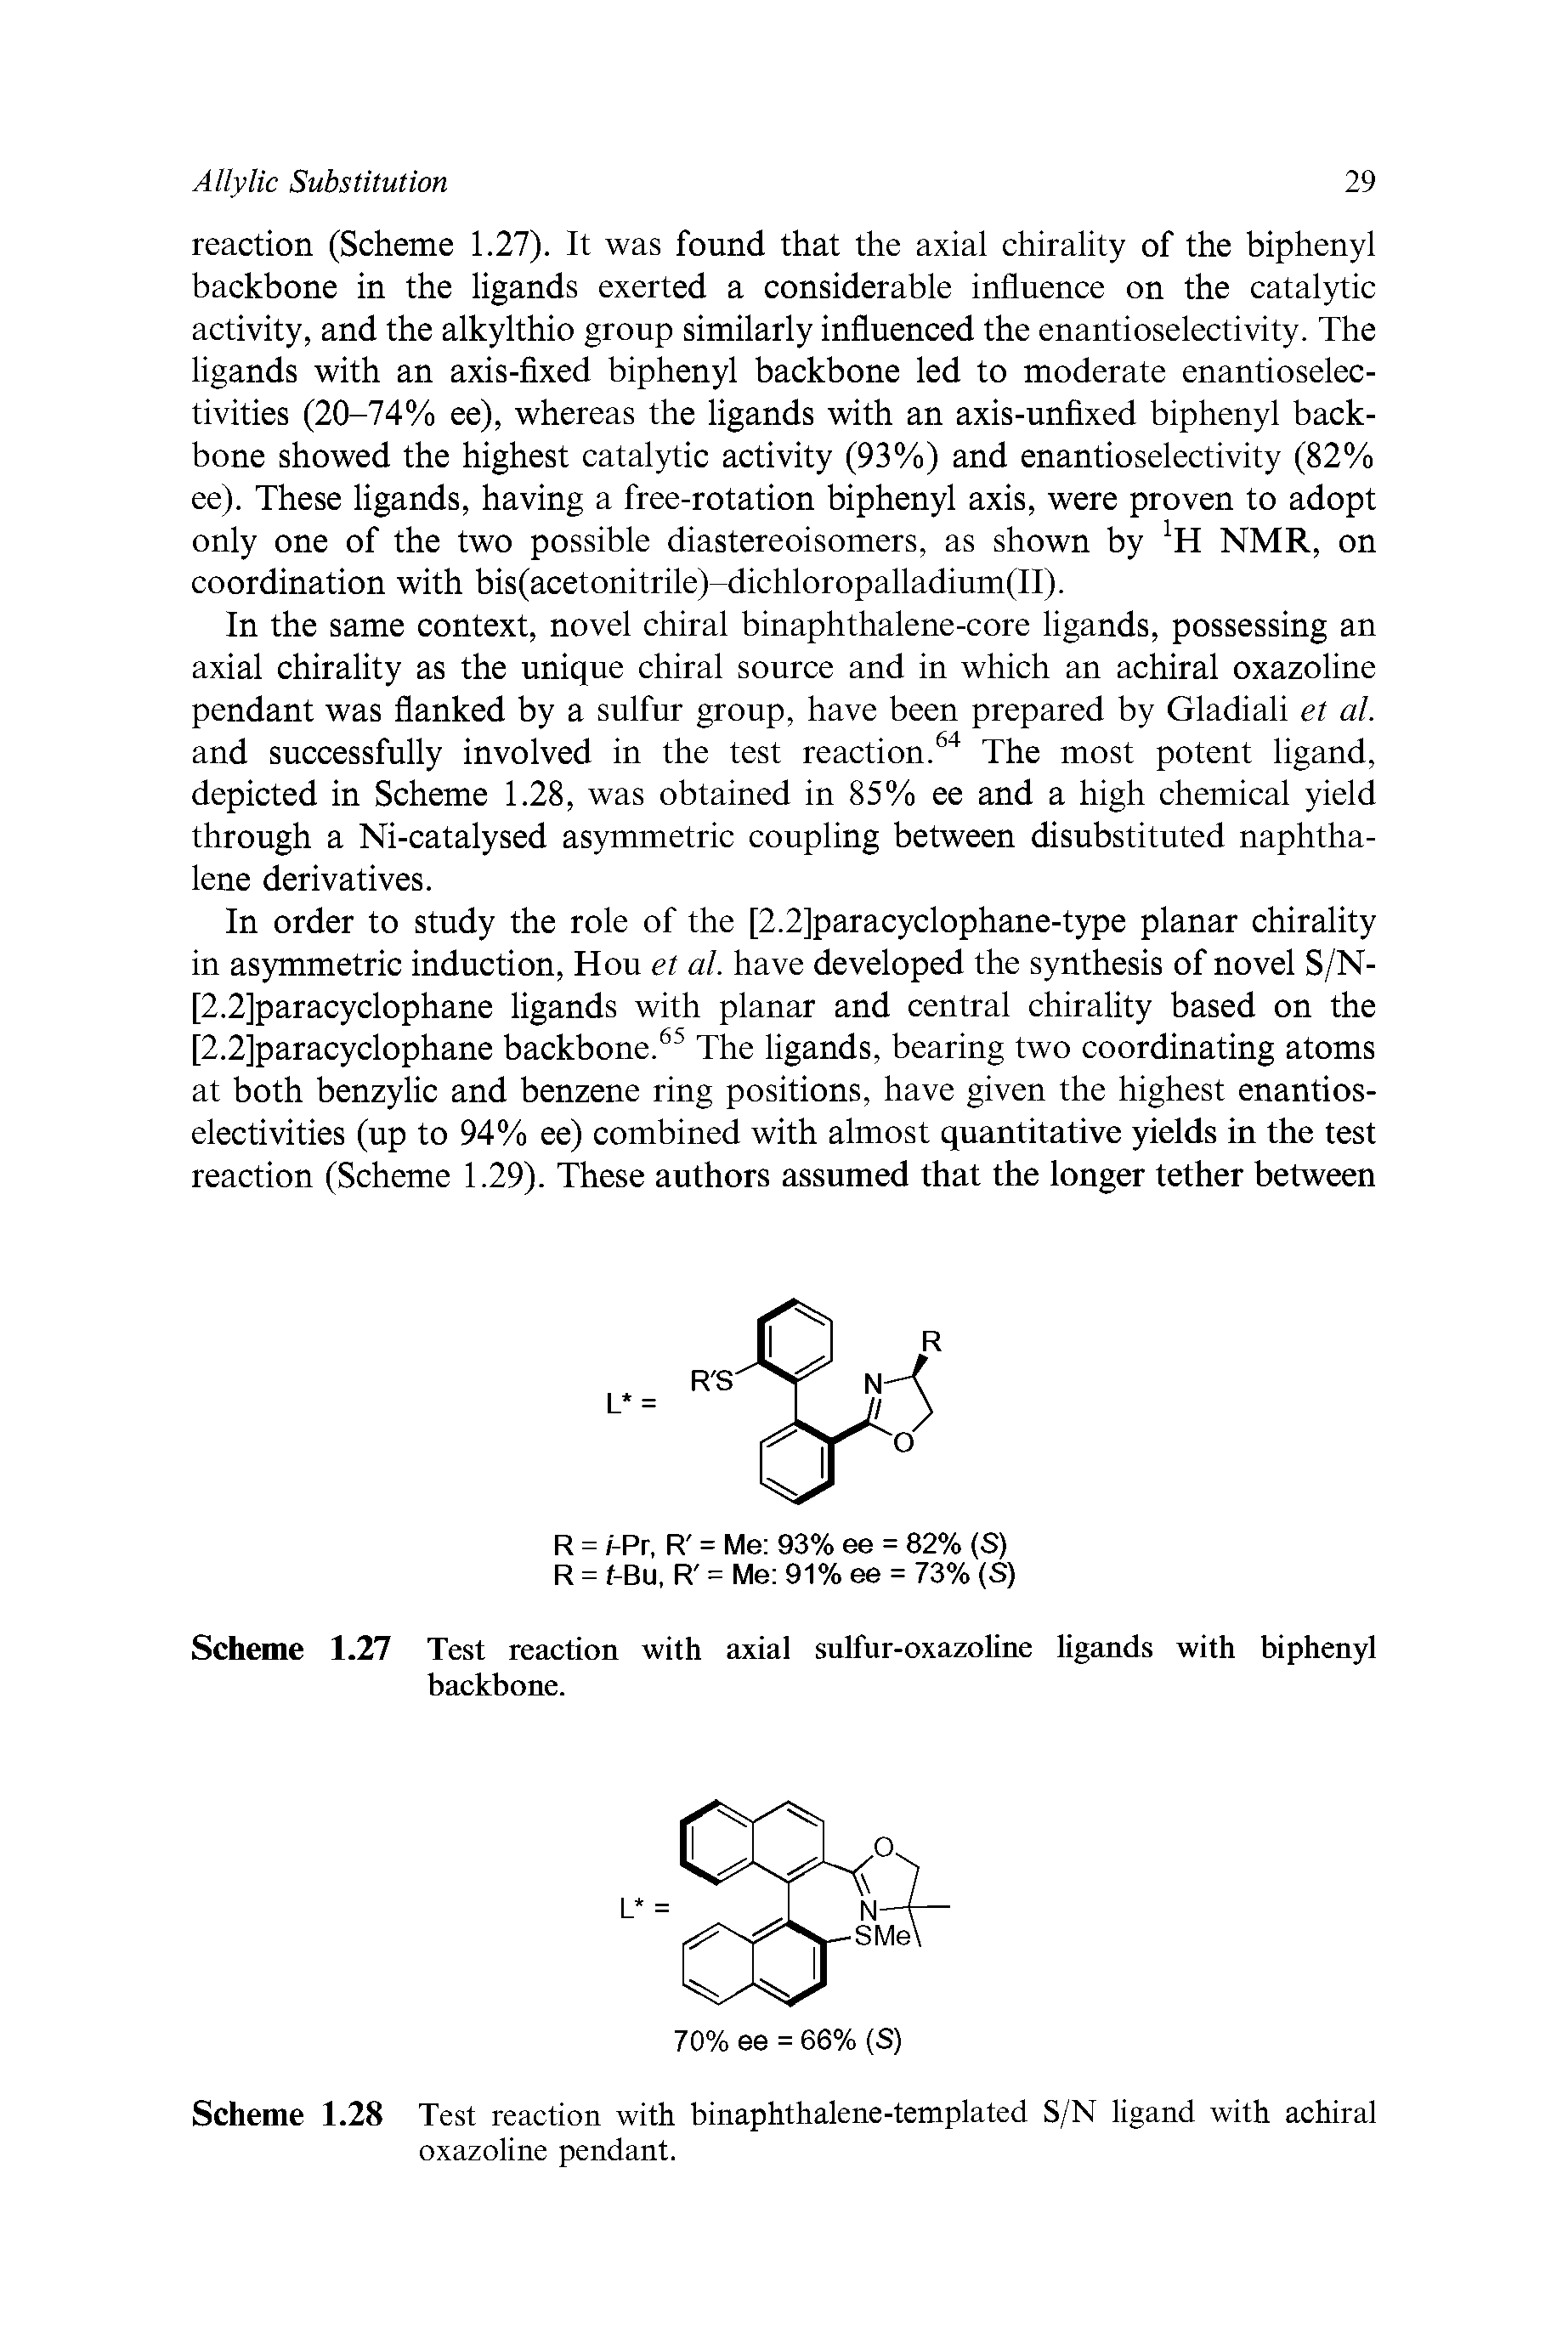 Scheme 1.27 Test reaction with axial sulfur-oxazoline ligands with biphenyl backbone.